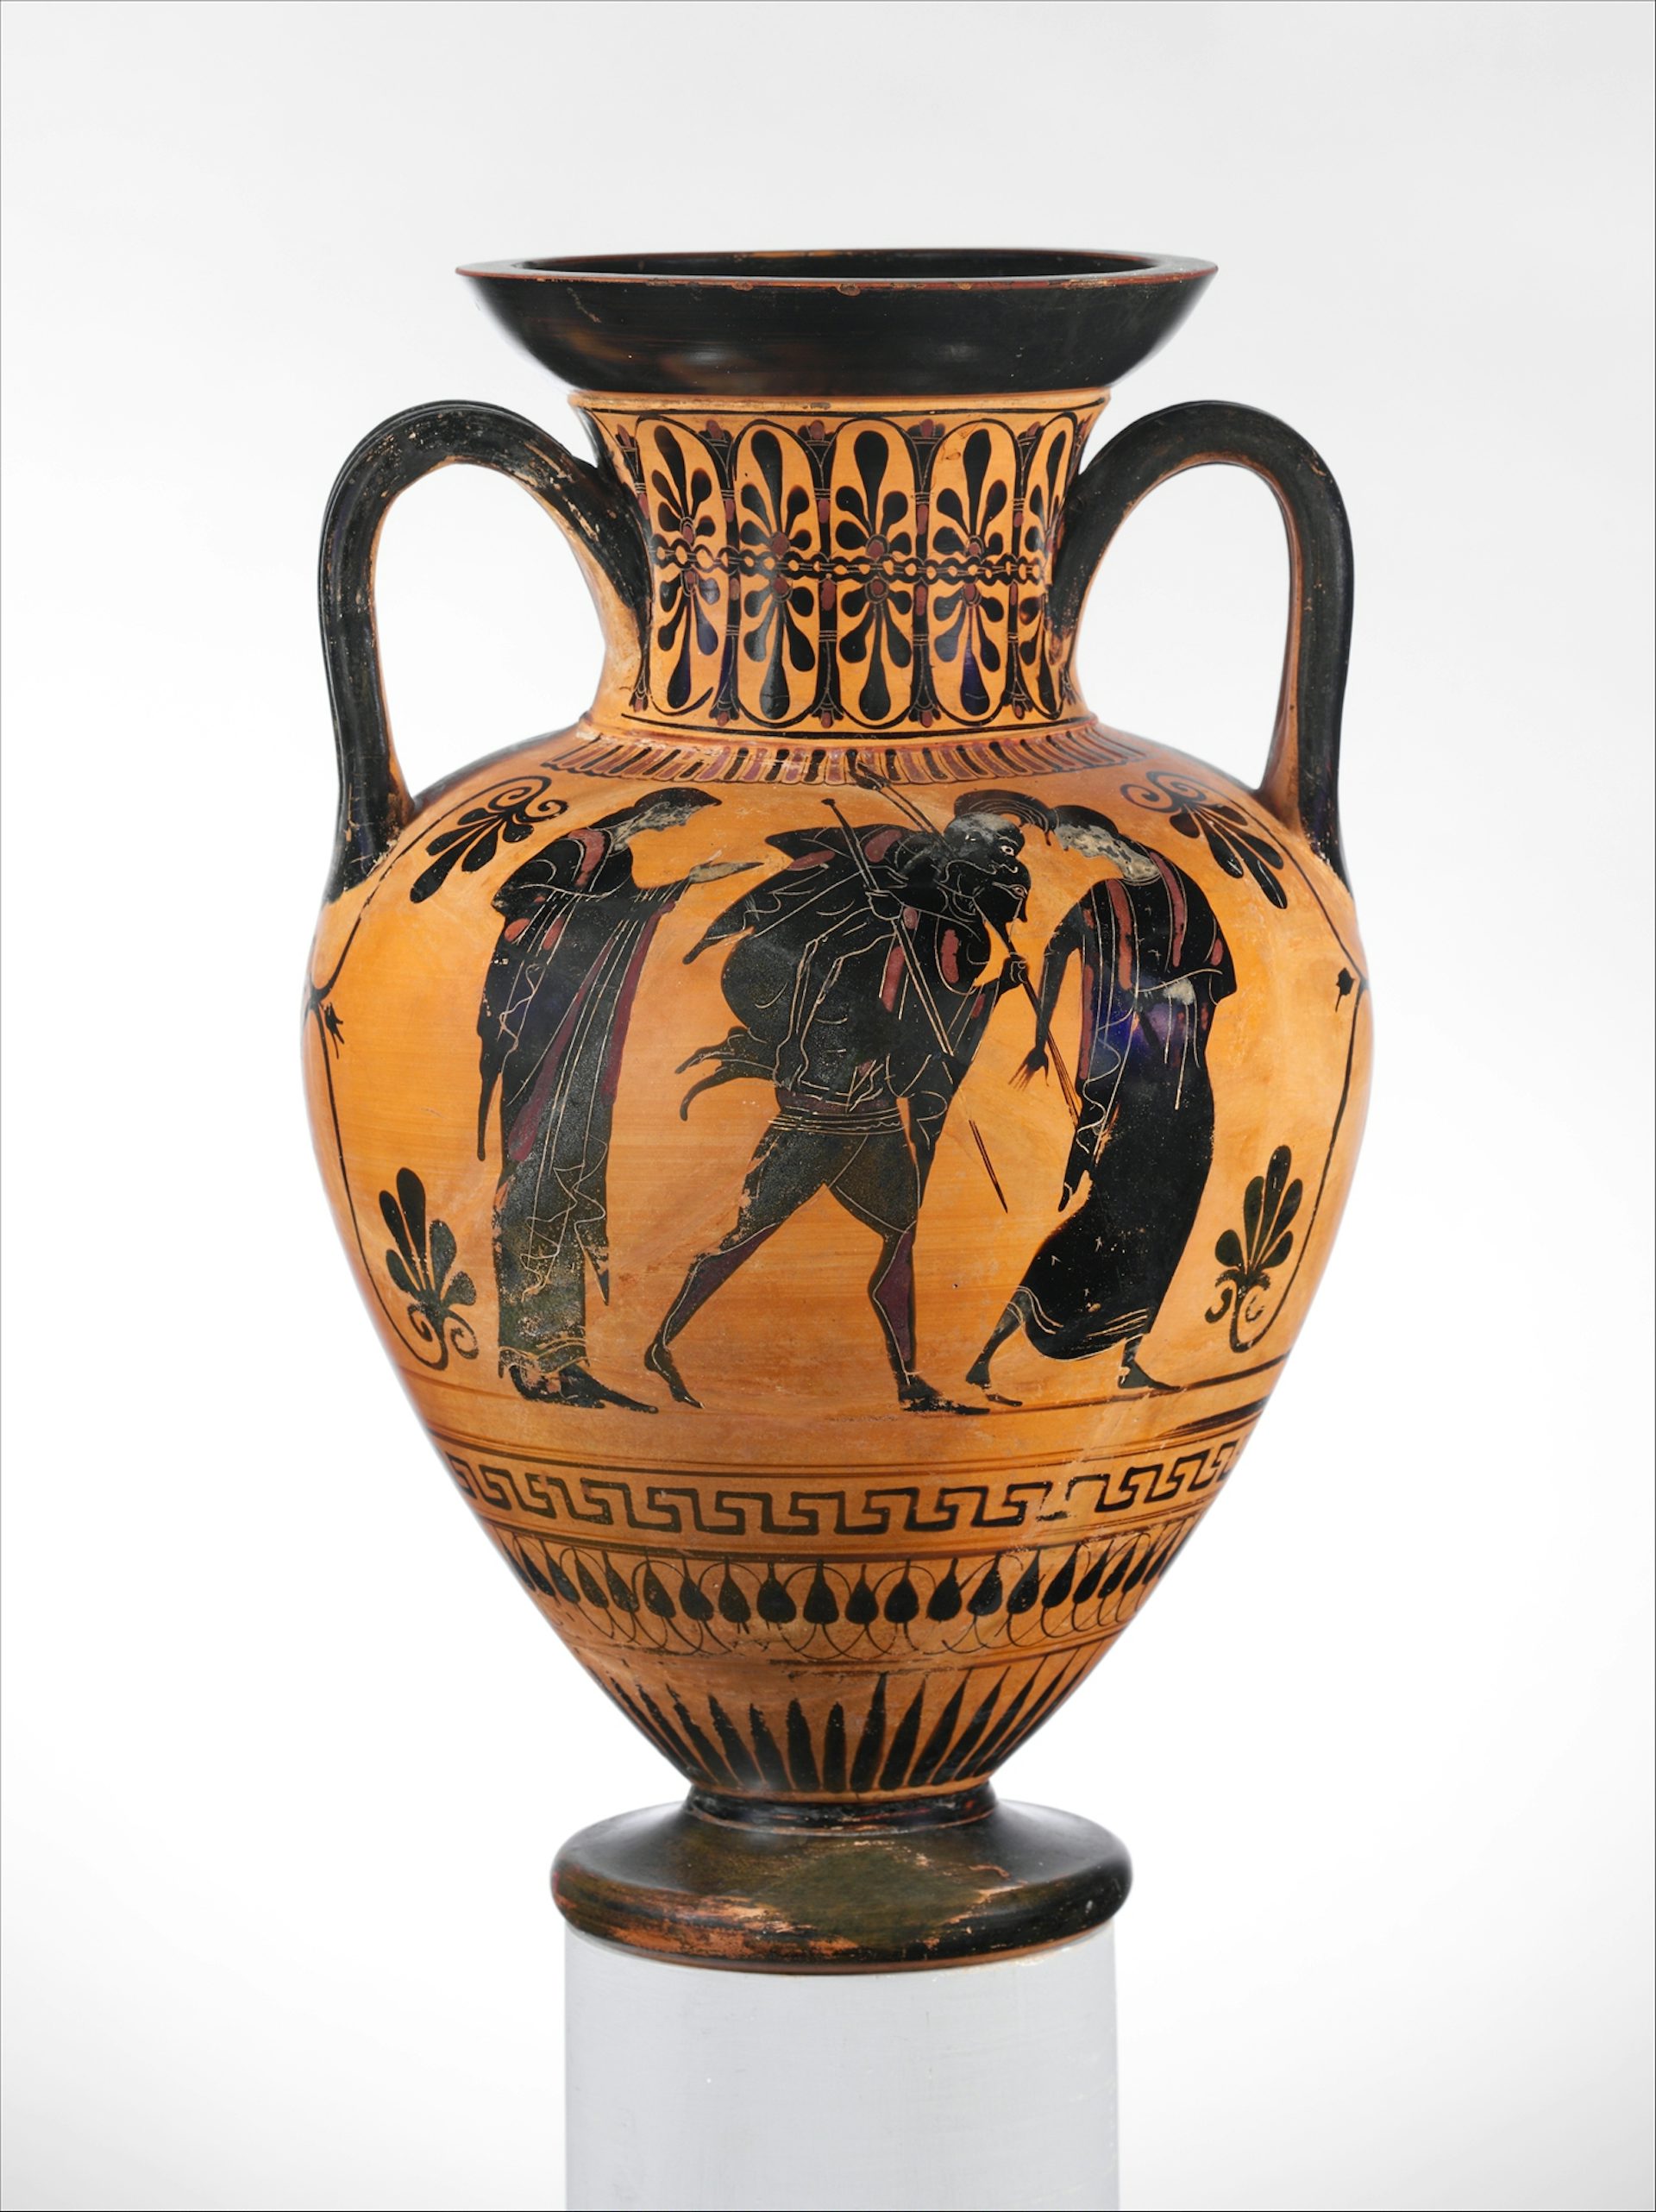 Vase painting of Aeneas carrying Anchises from Troy